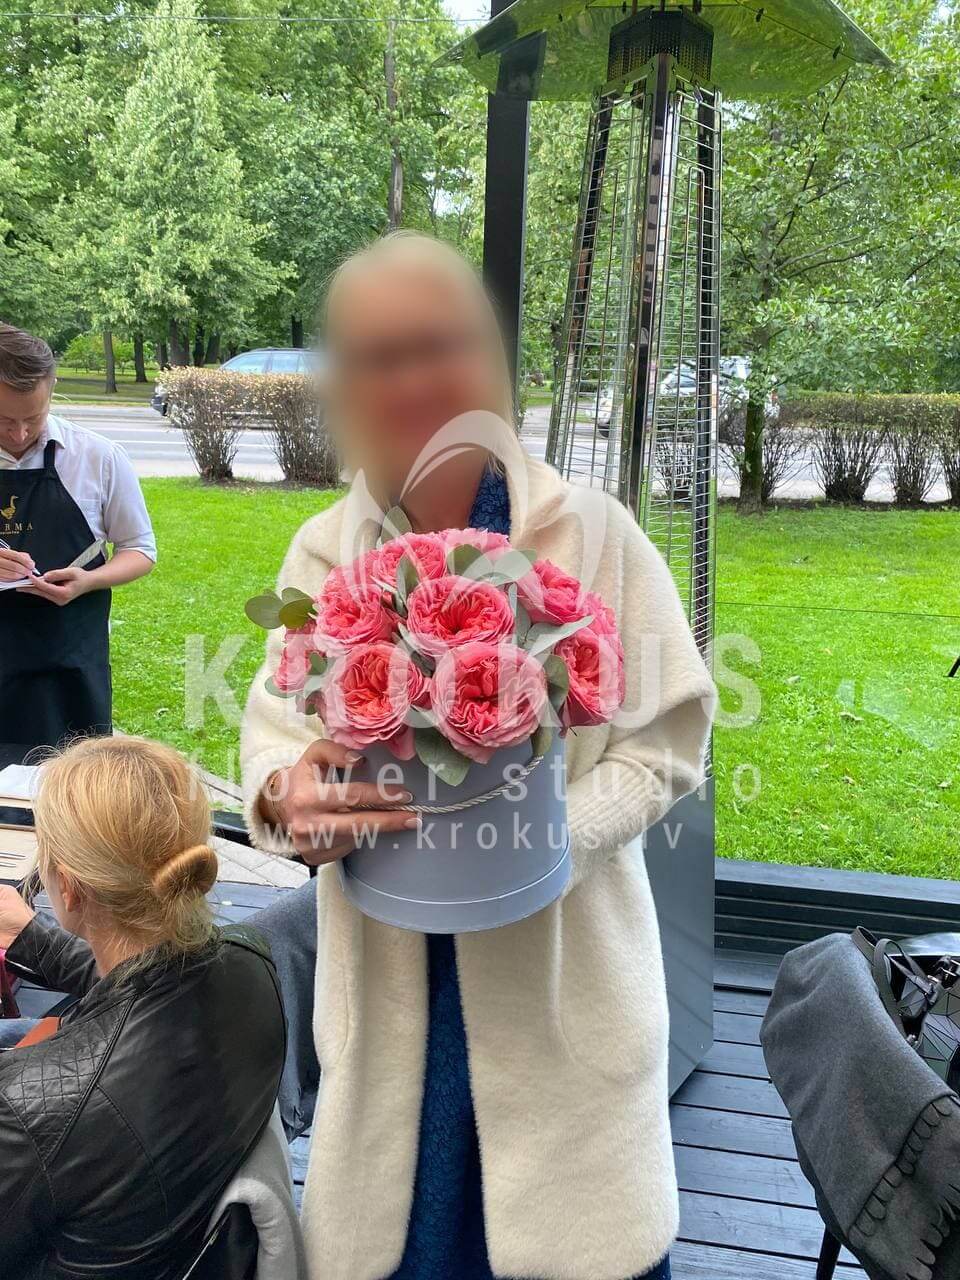 Deliver flowers to Mežāres (boxgum treepeony roses)